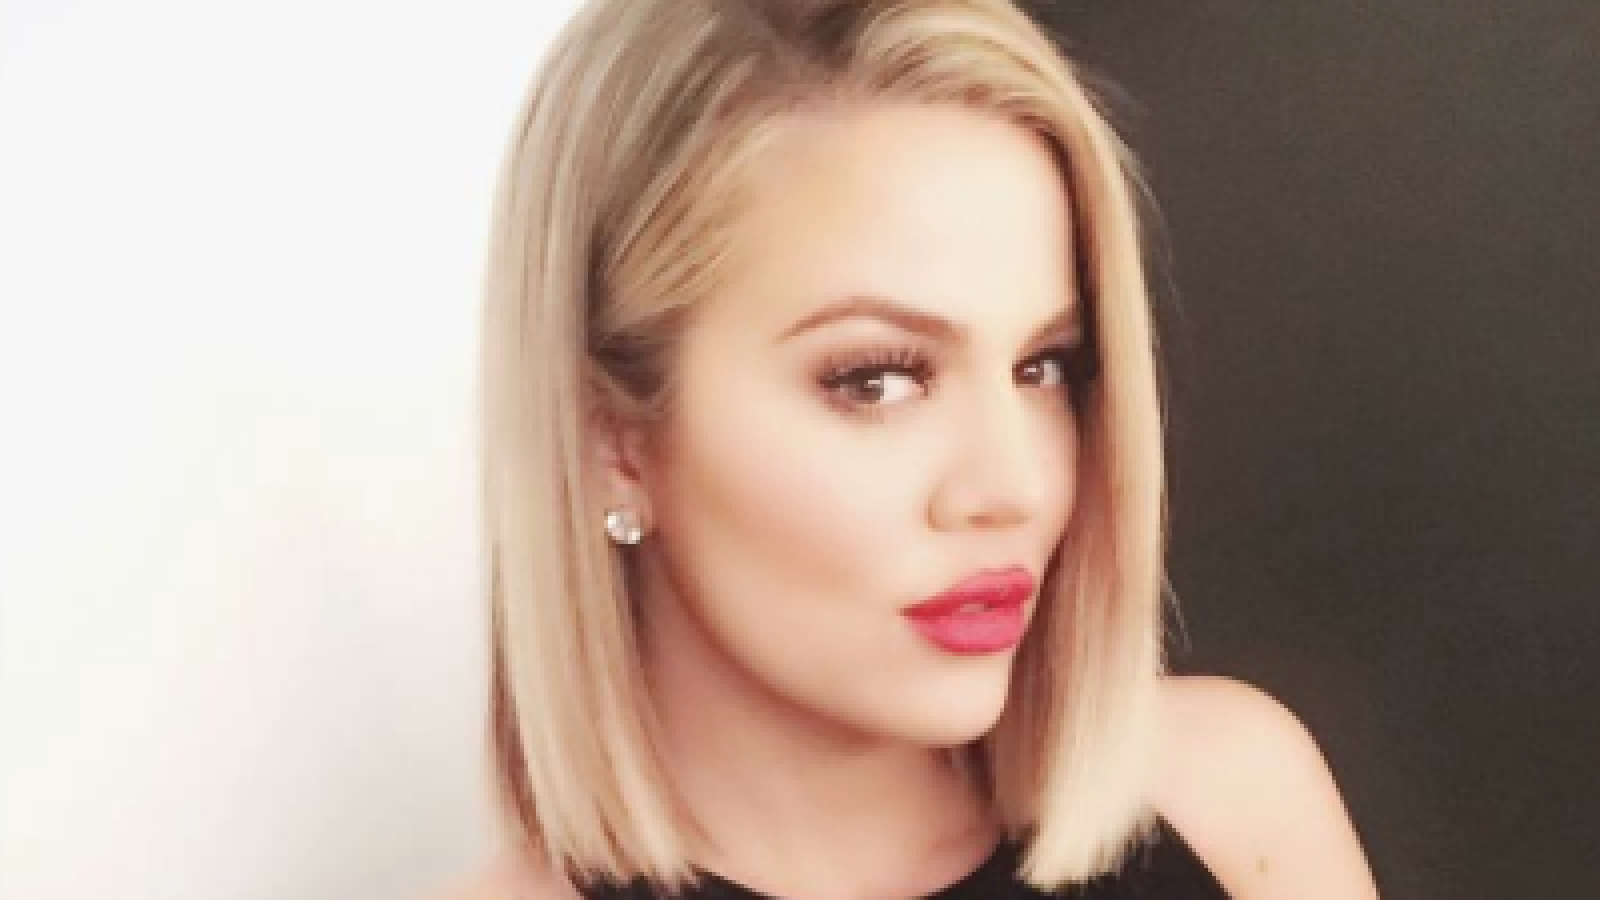 Khloe Kardashian Takes Her Lob Hairstyle Even Shorter: Before, After Pics